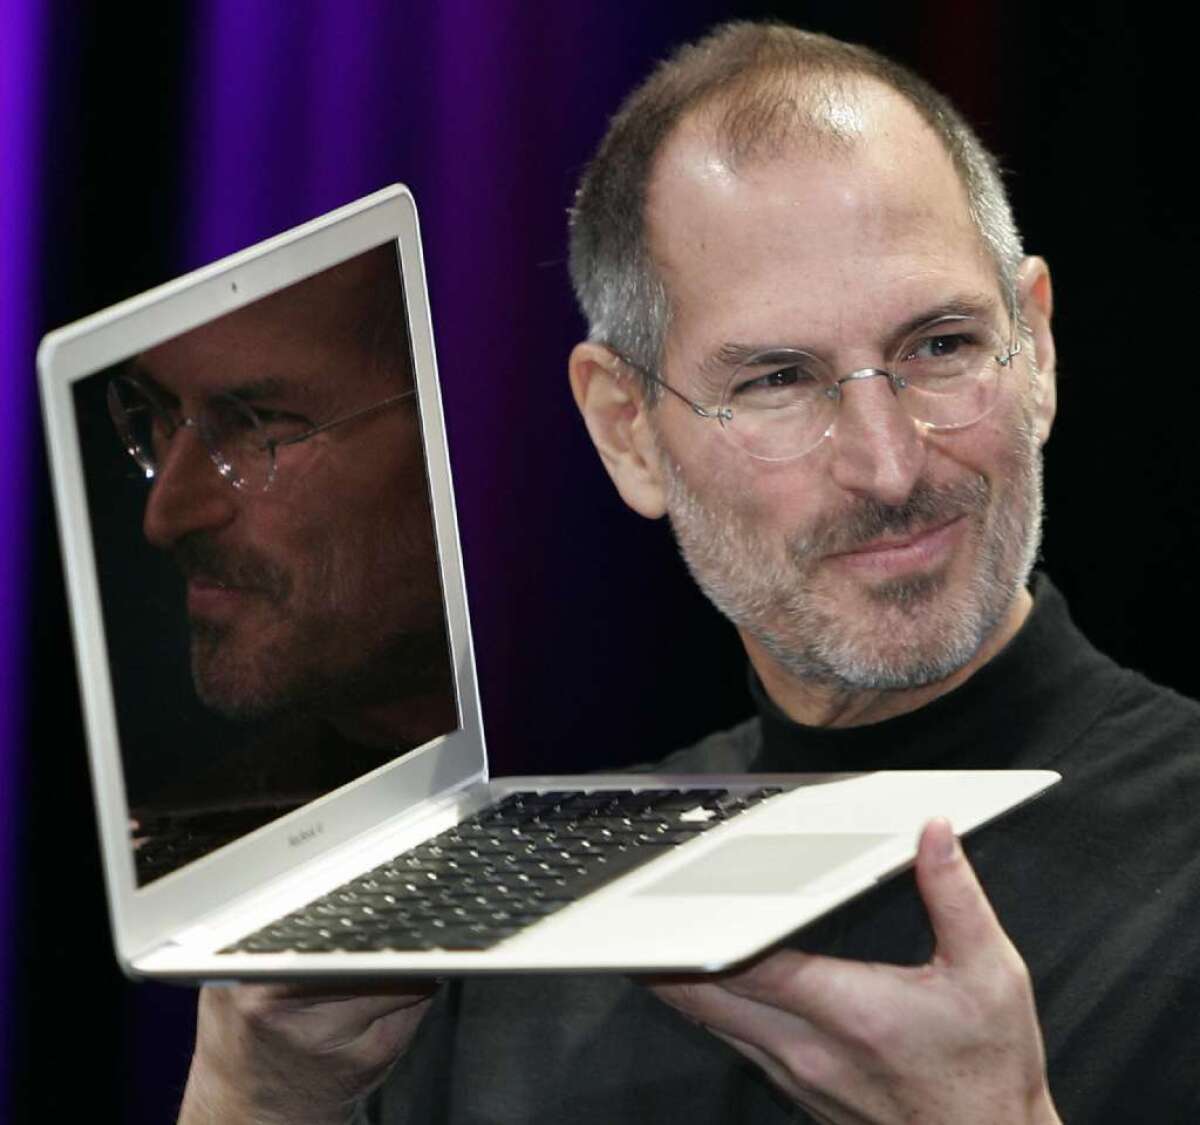 Steve Jobs: Not your typical one-percenter.